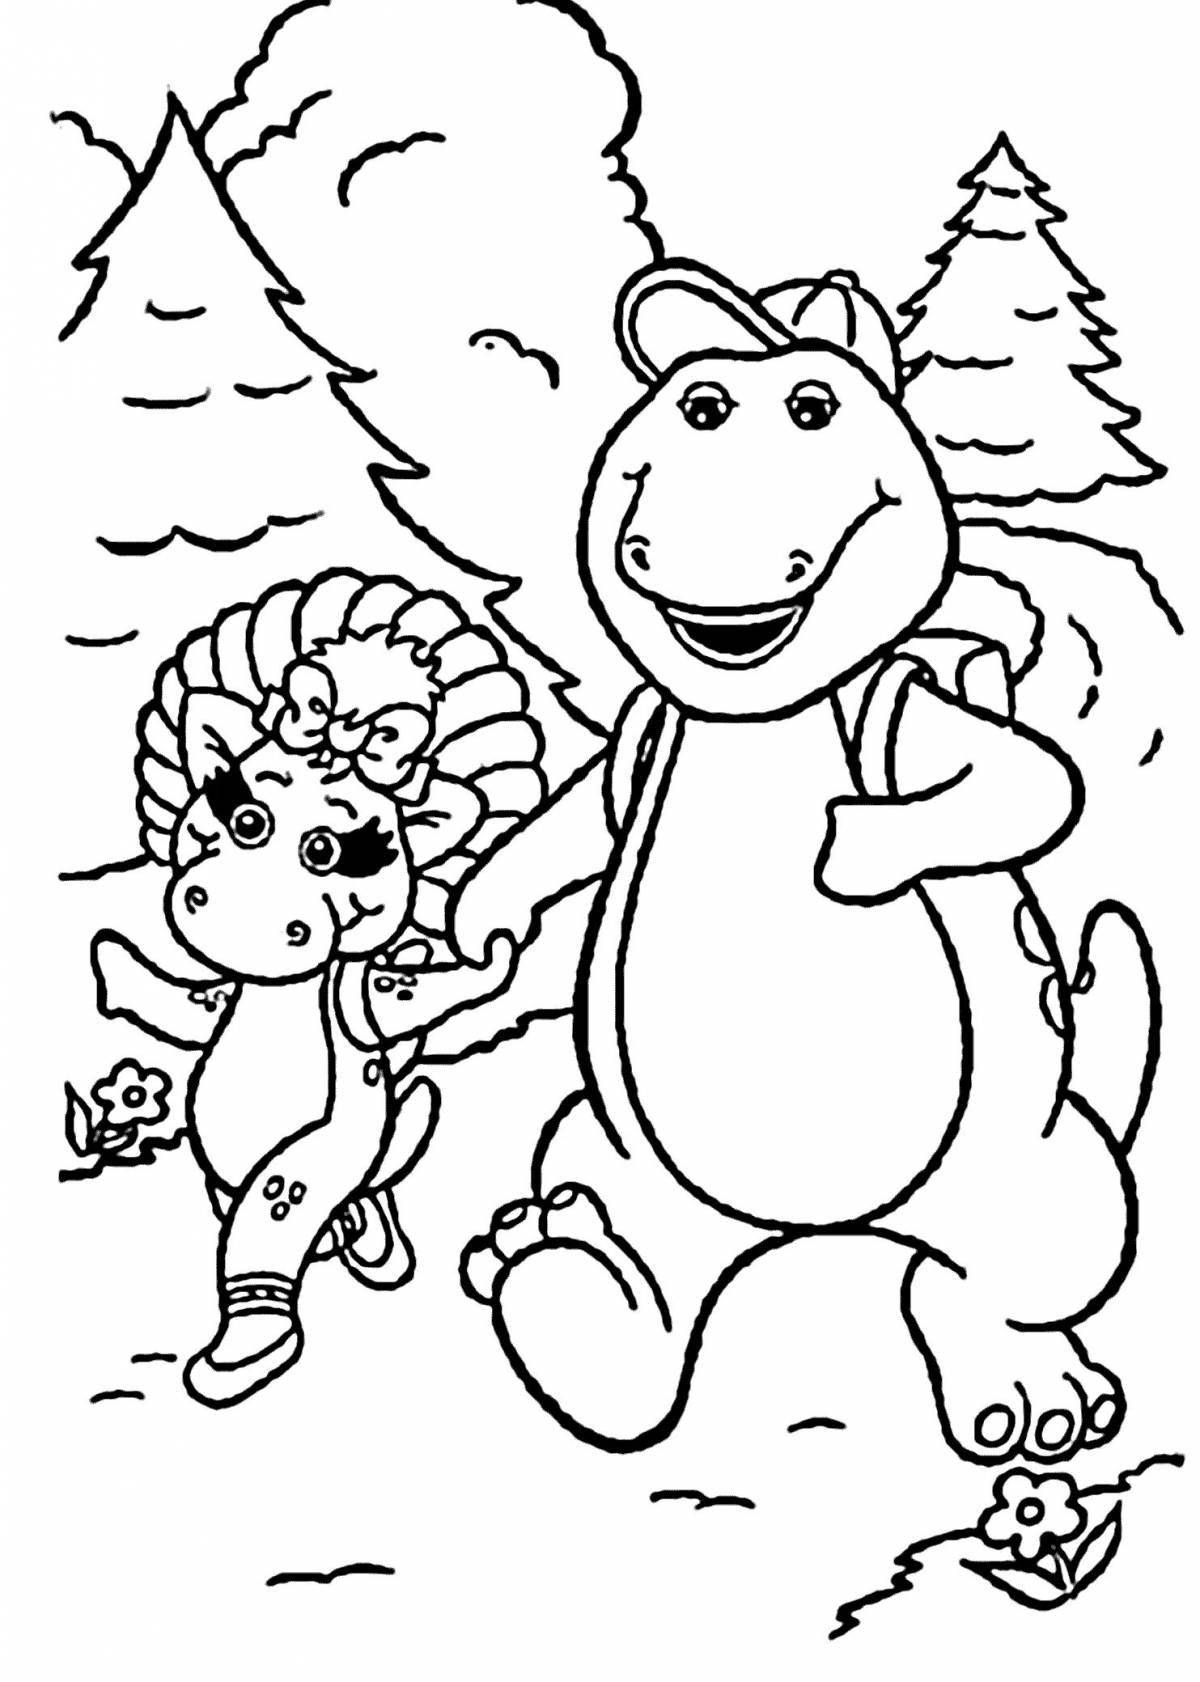 Barney's adorable bear coloring page